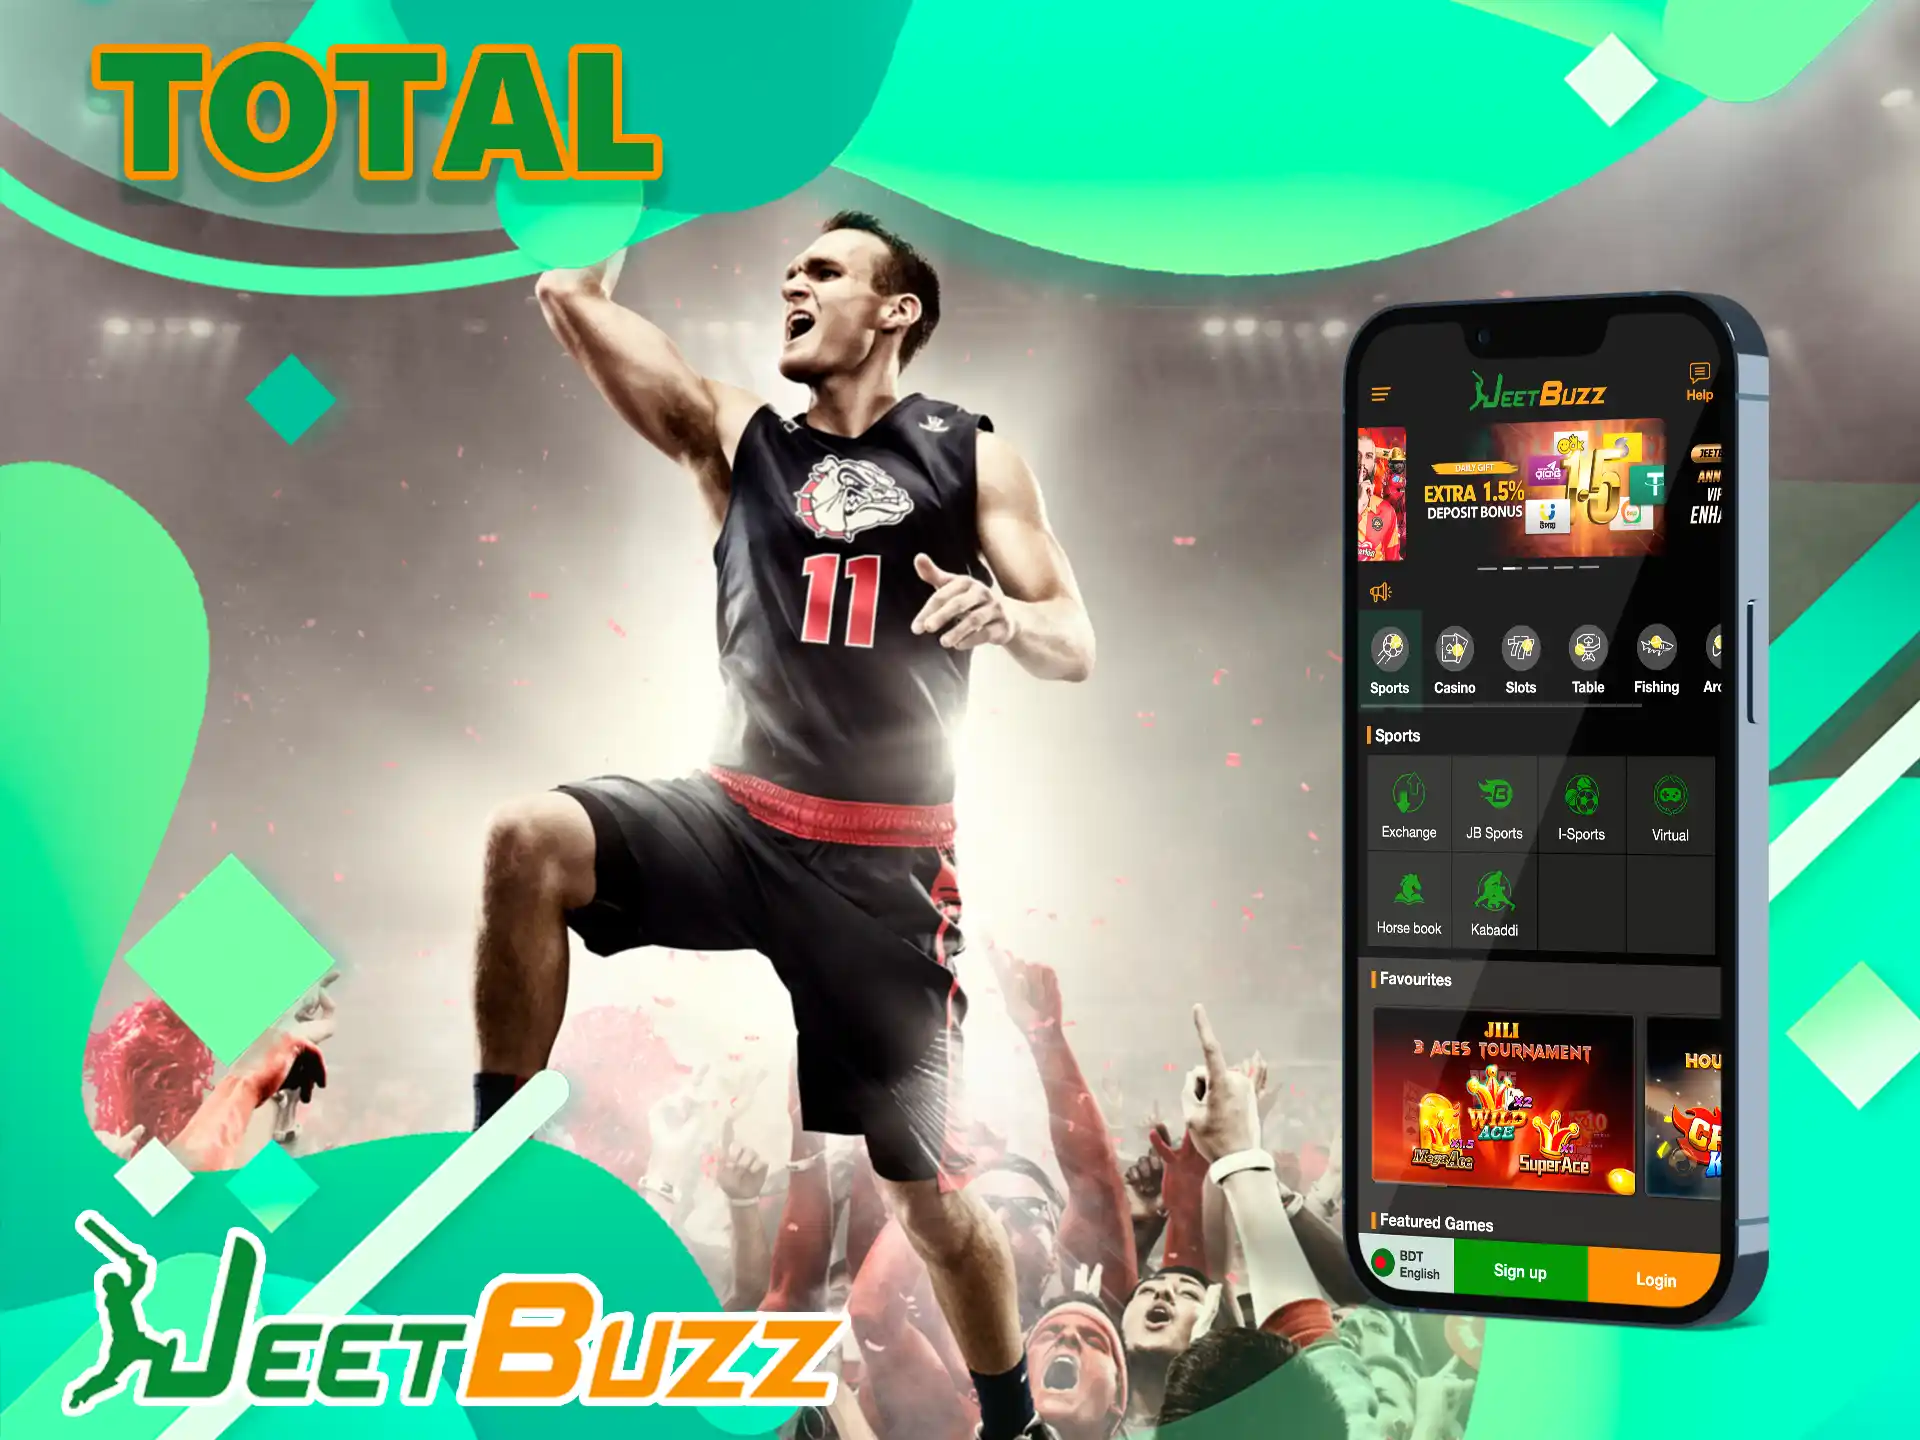 This type of betting in JeetBuzz is for more experienced users, here you have to guess how many points are scored.